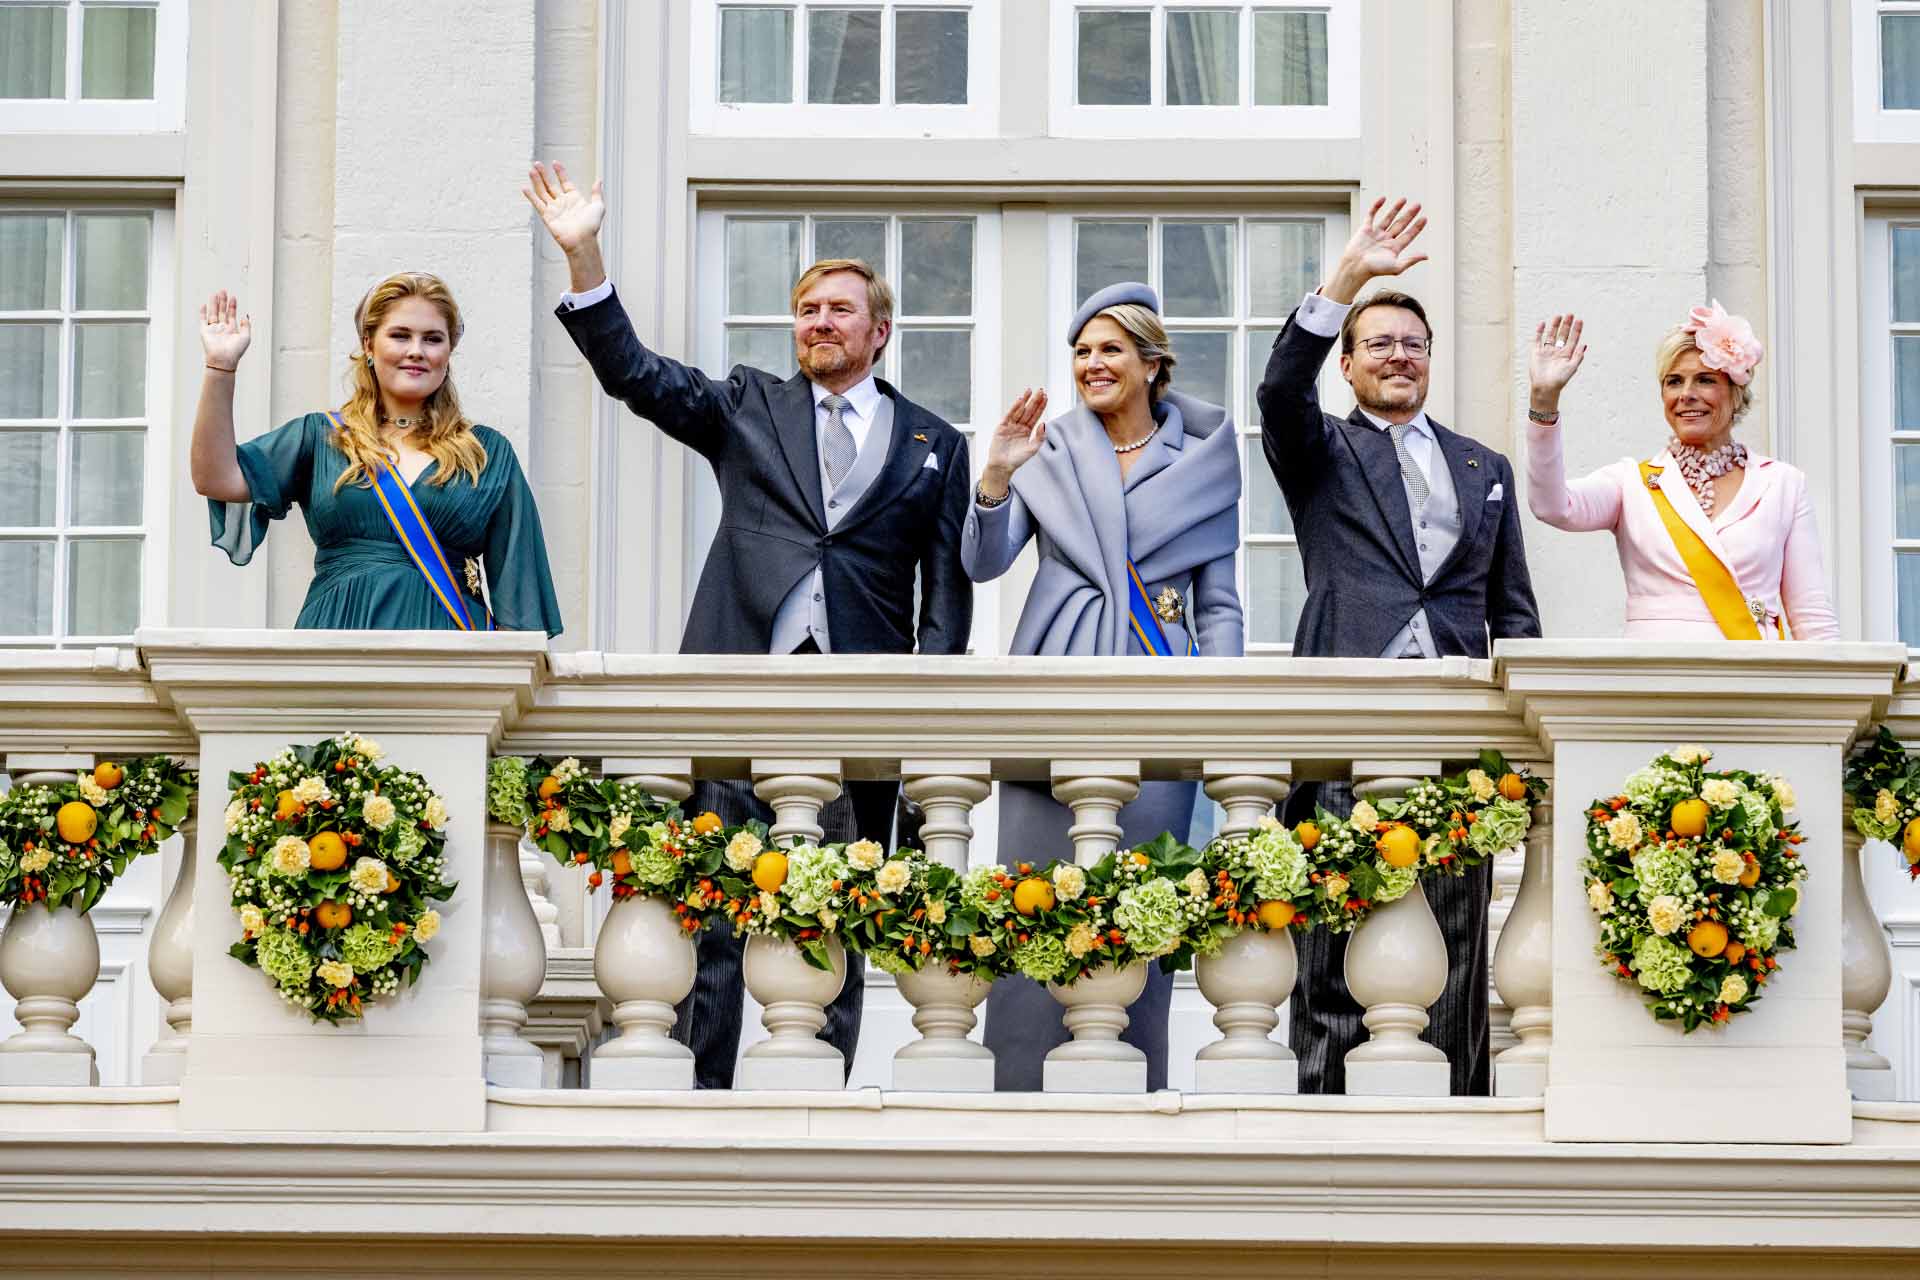 King Willem Alexander, Queen Maxima, Princess Amalia, Prince Constantijn and Princess Laurentien during Prinsjesdag 2022 (opening parliamentary year) in The Hague.